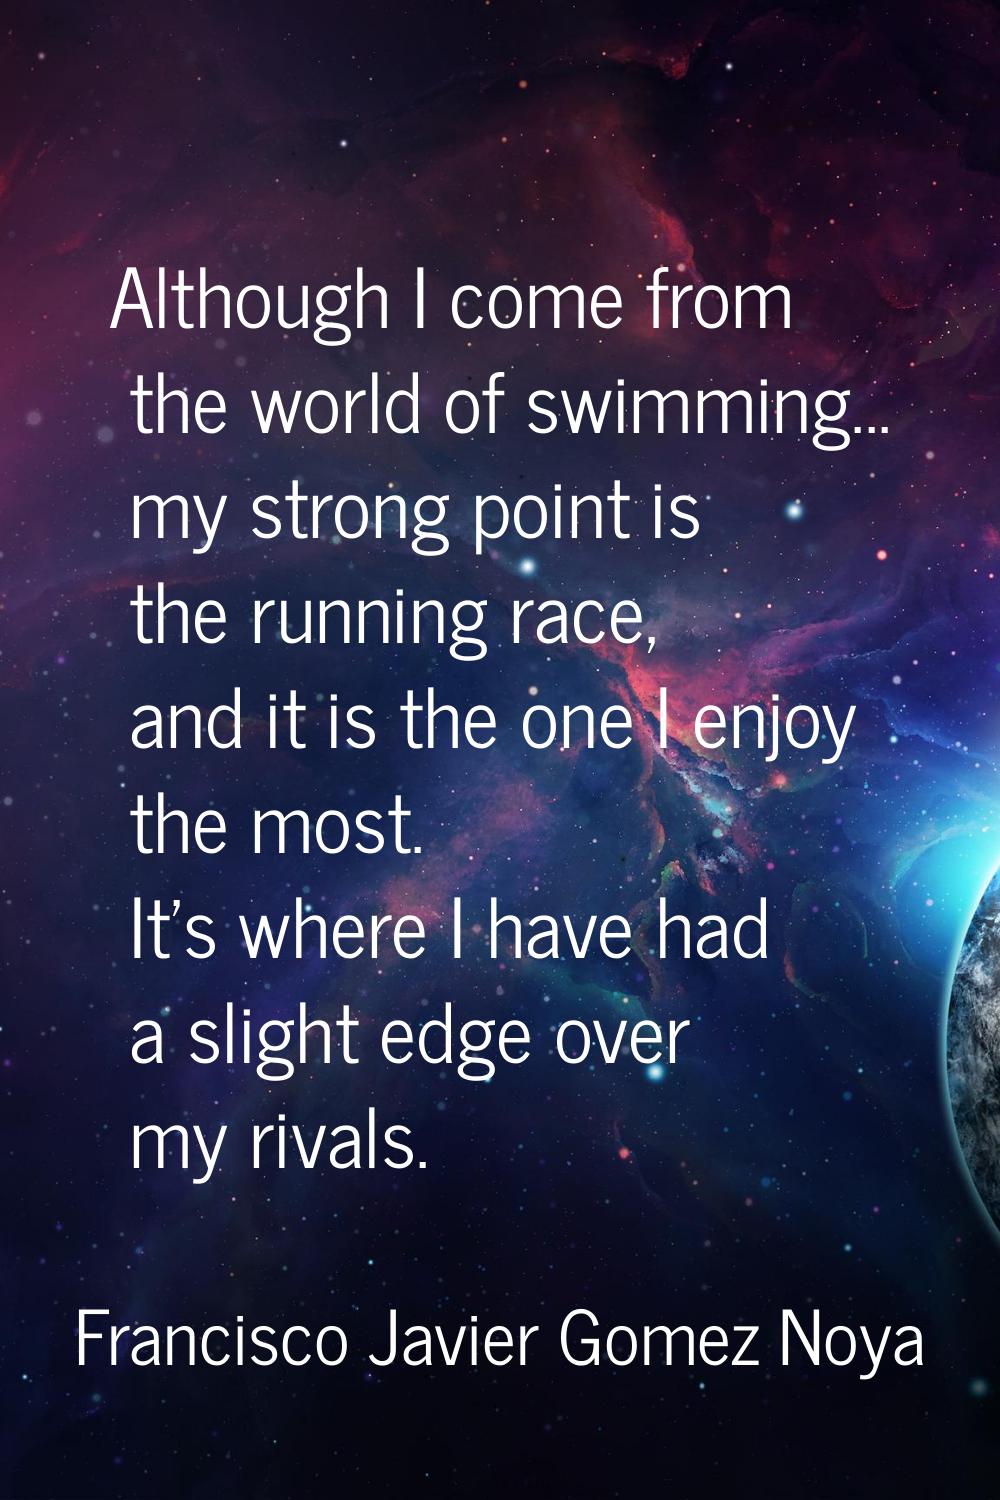 Although I come from the world of swimming... my strong point is the running race, and it is the on